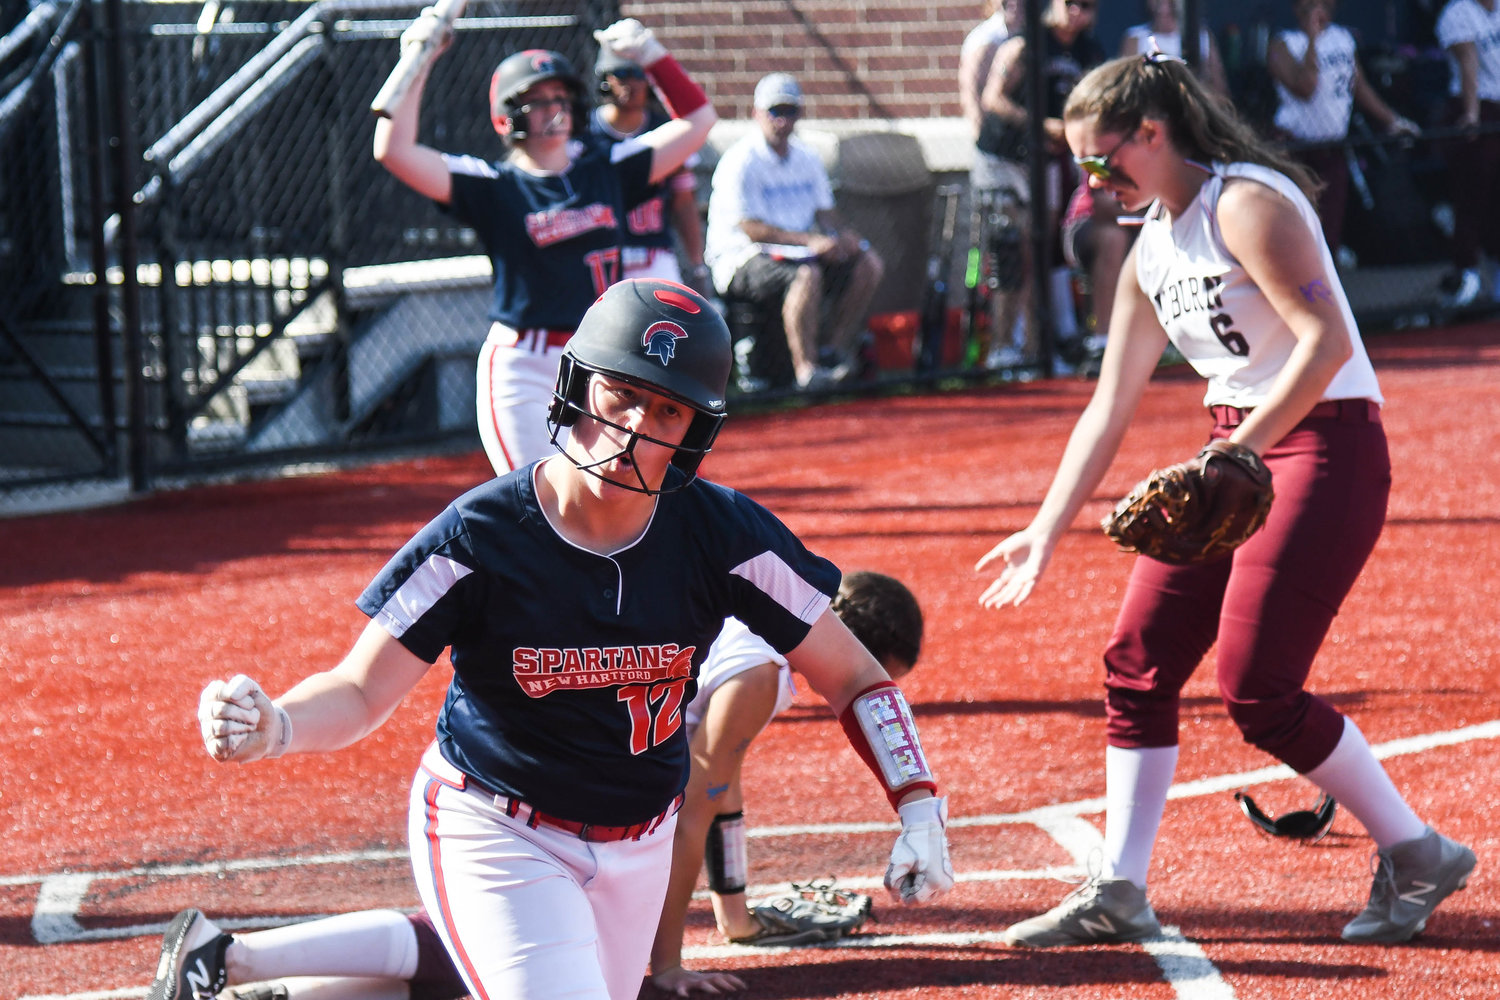 New Hartford baserunner Sienna Holmes celebrates after sliding in safe at home plate during the Section III Class A final against Auburn on Thursday at Onondaga Community College in Syracuse. Holmes pitched the Spartans to a 6-3 win.